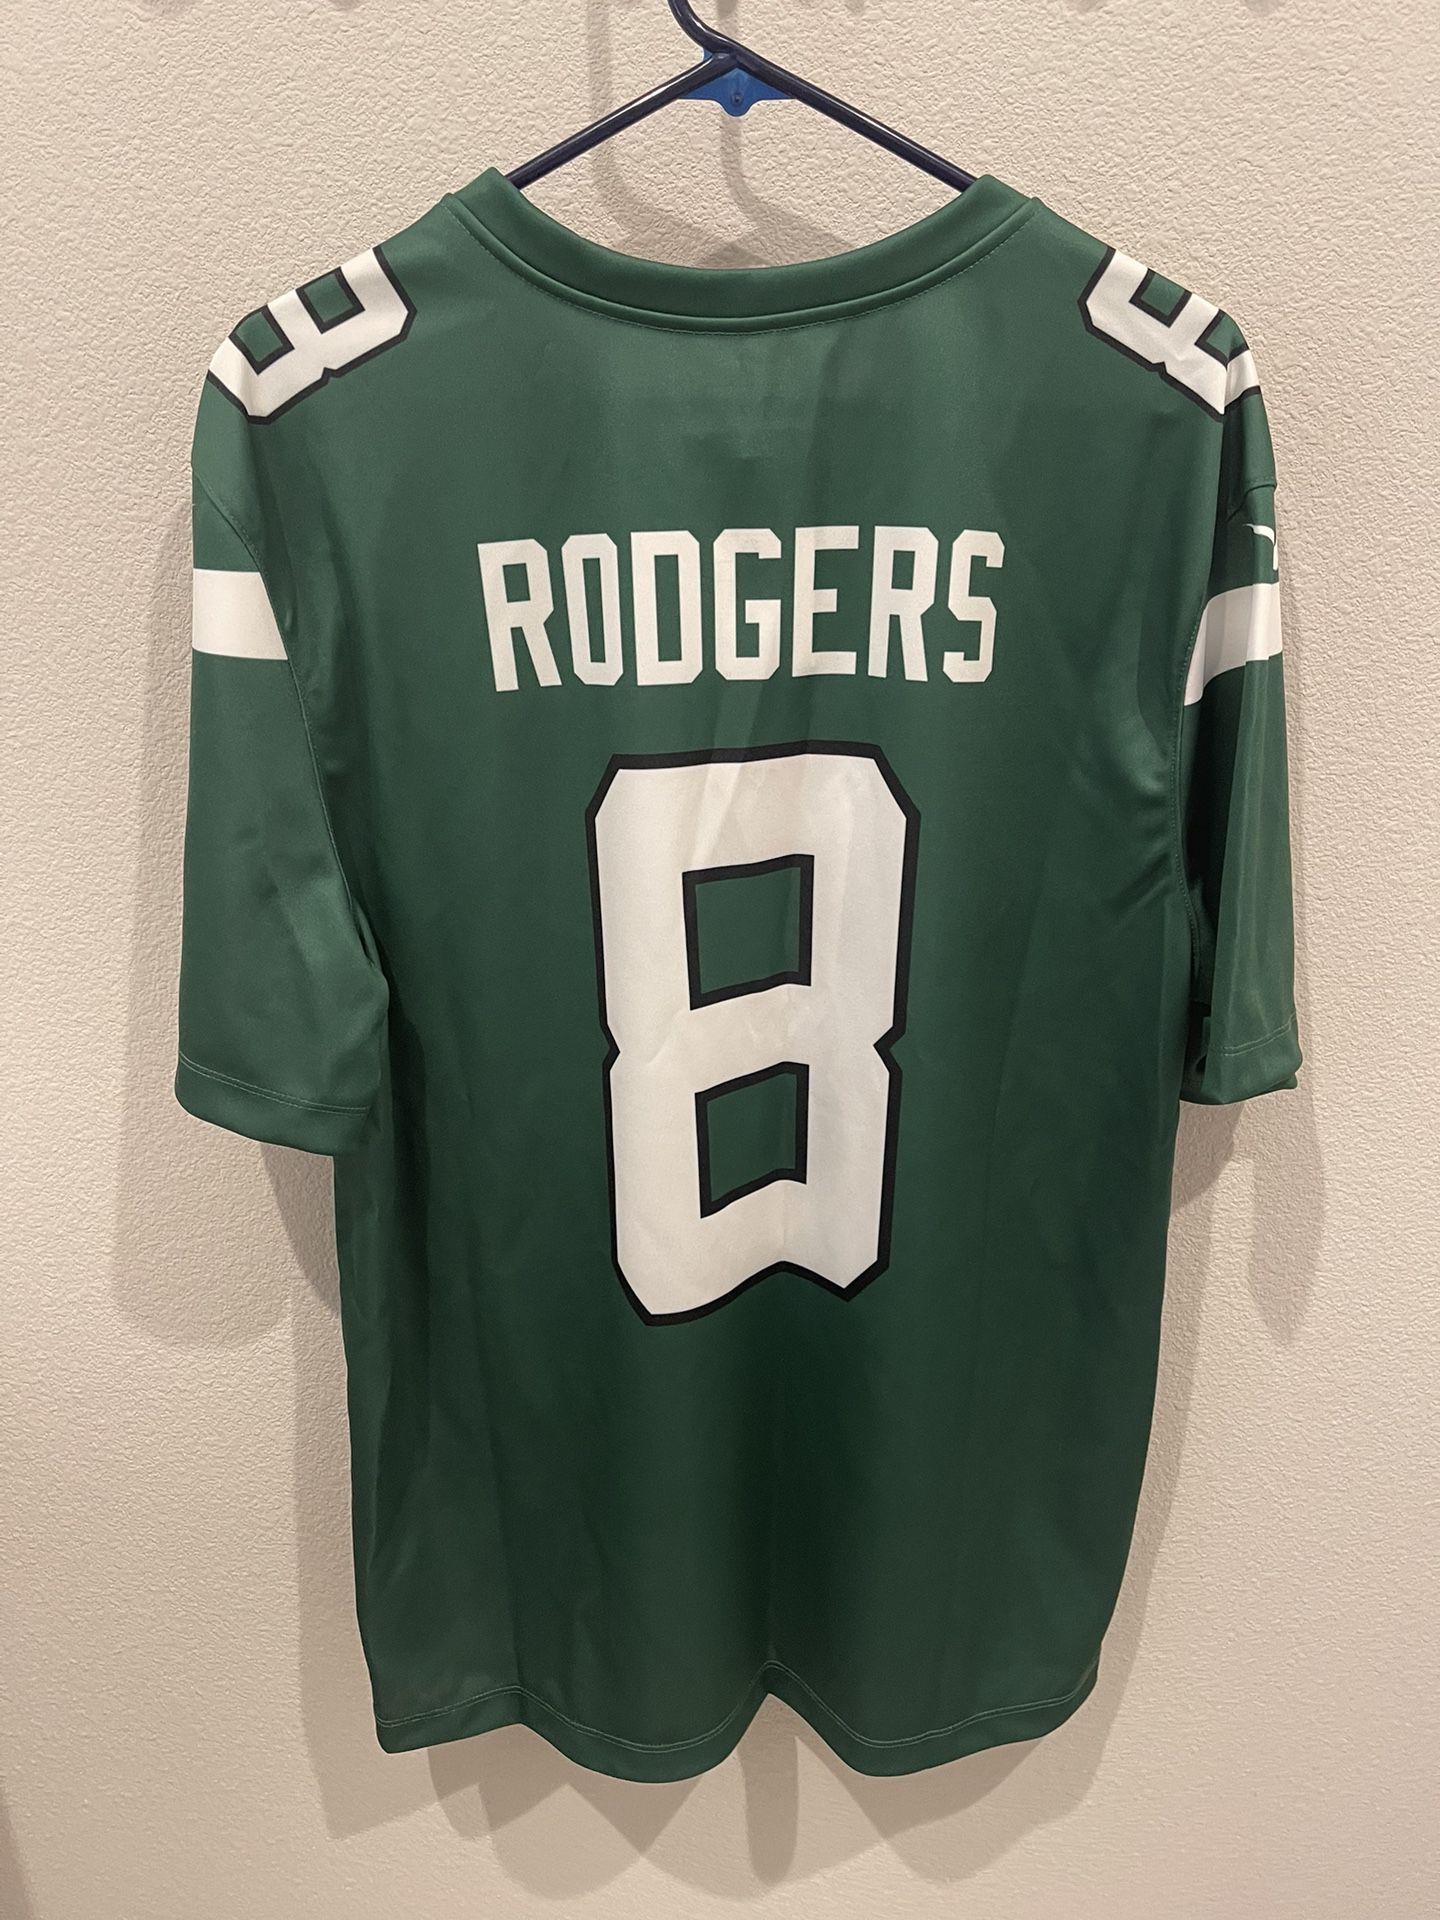 New York Jets Aaron Rodgers Jersey (Green)